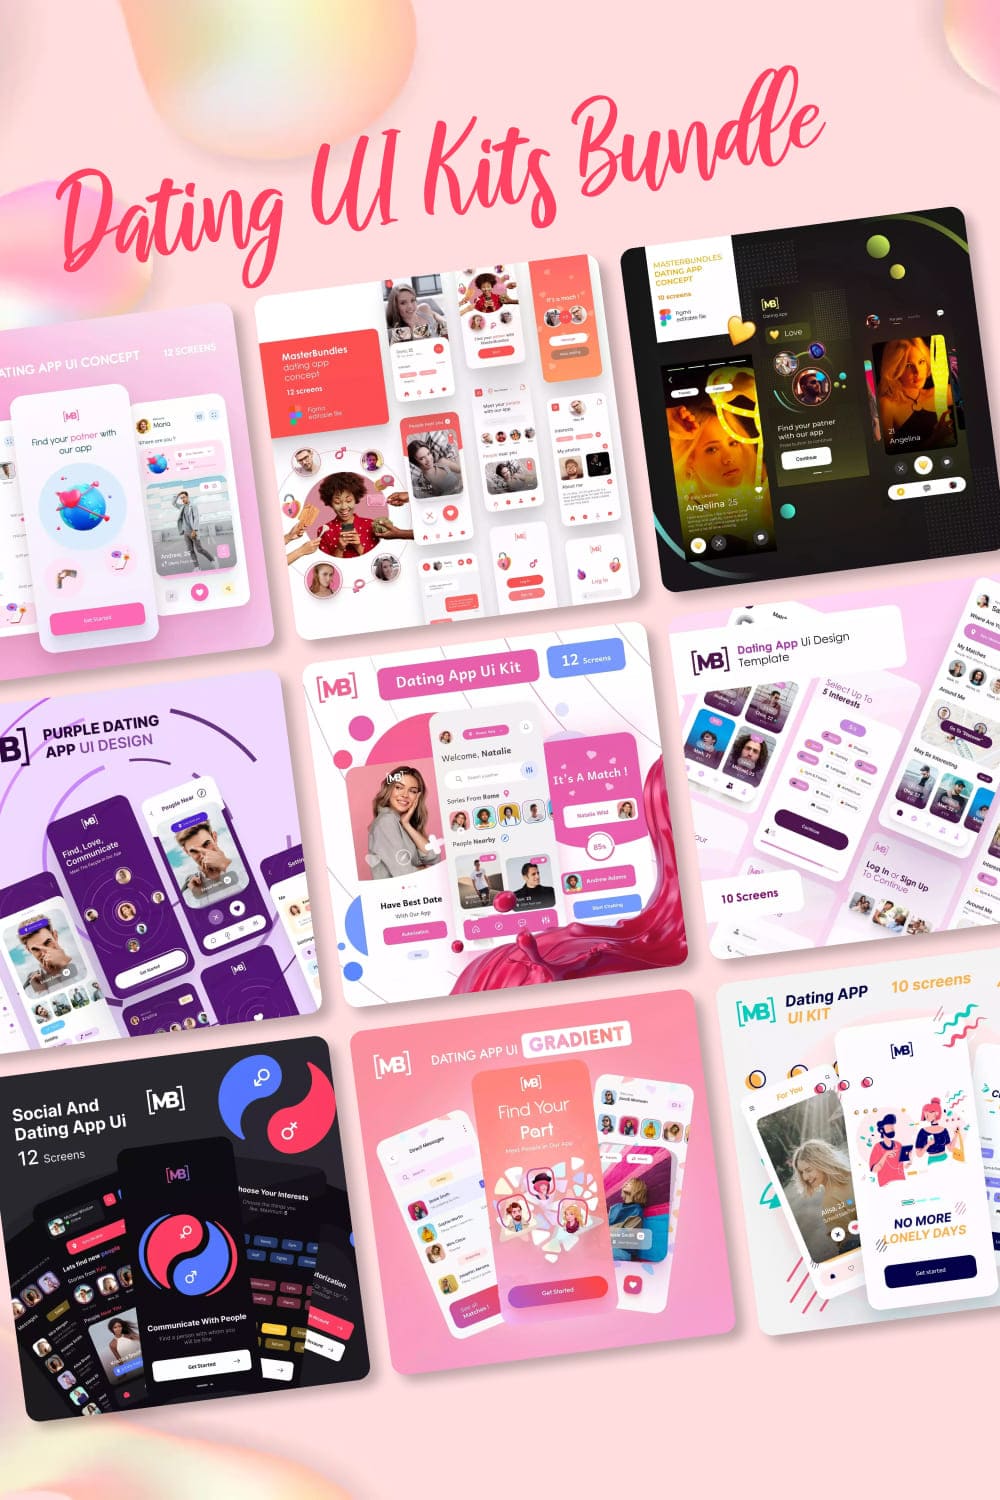 Dating ui kits bundle, picture for pinterest 1000x1500.